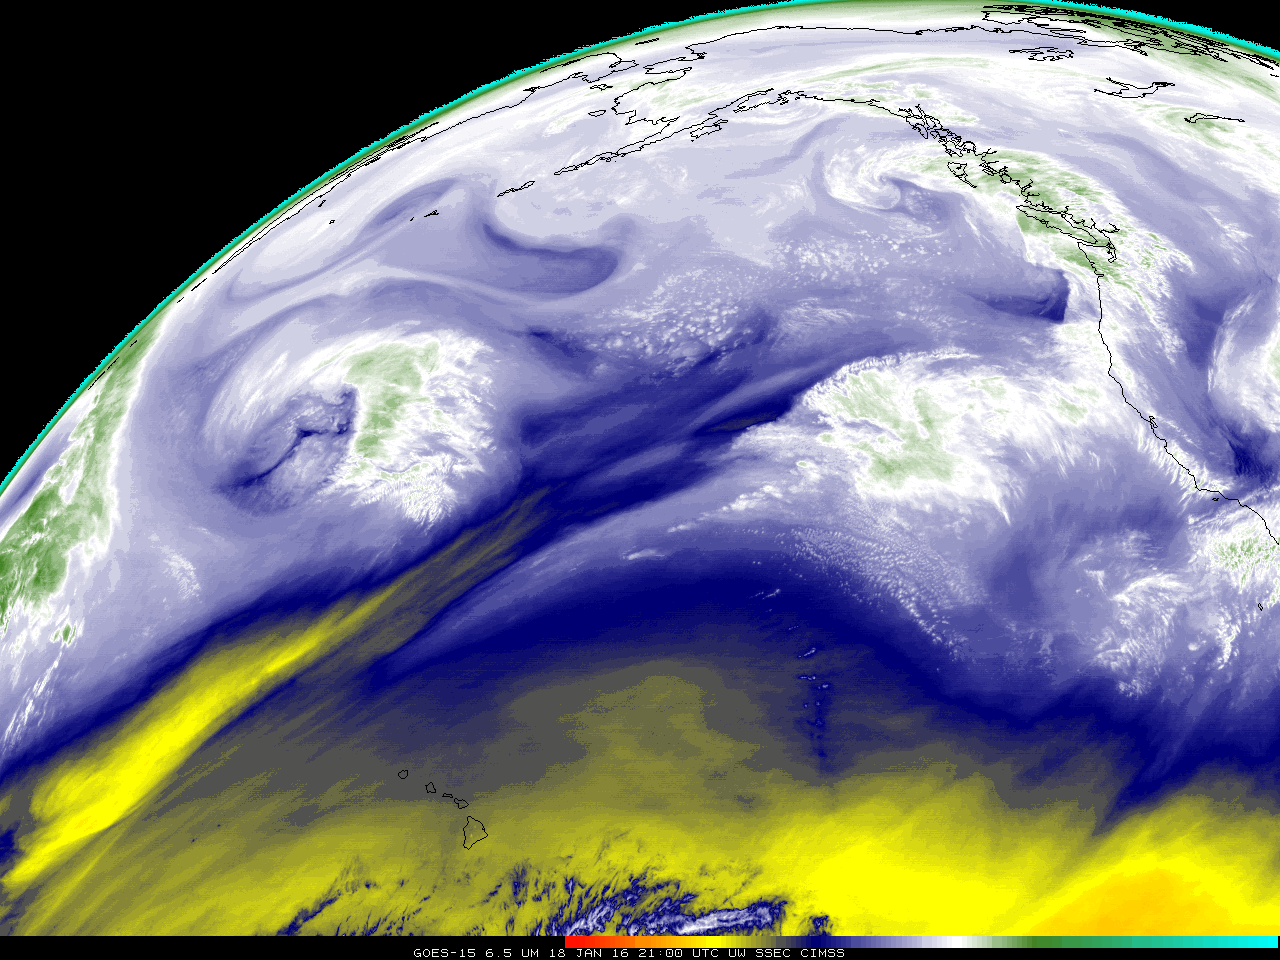 GOES-15 Water Vapor Infrared (6.5 µm) images [click to play animation]